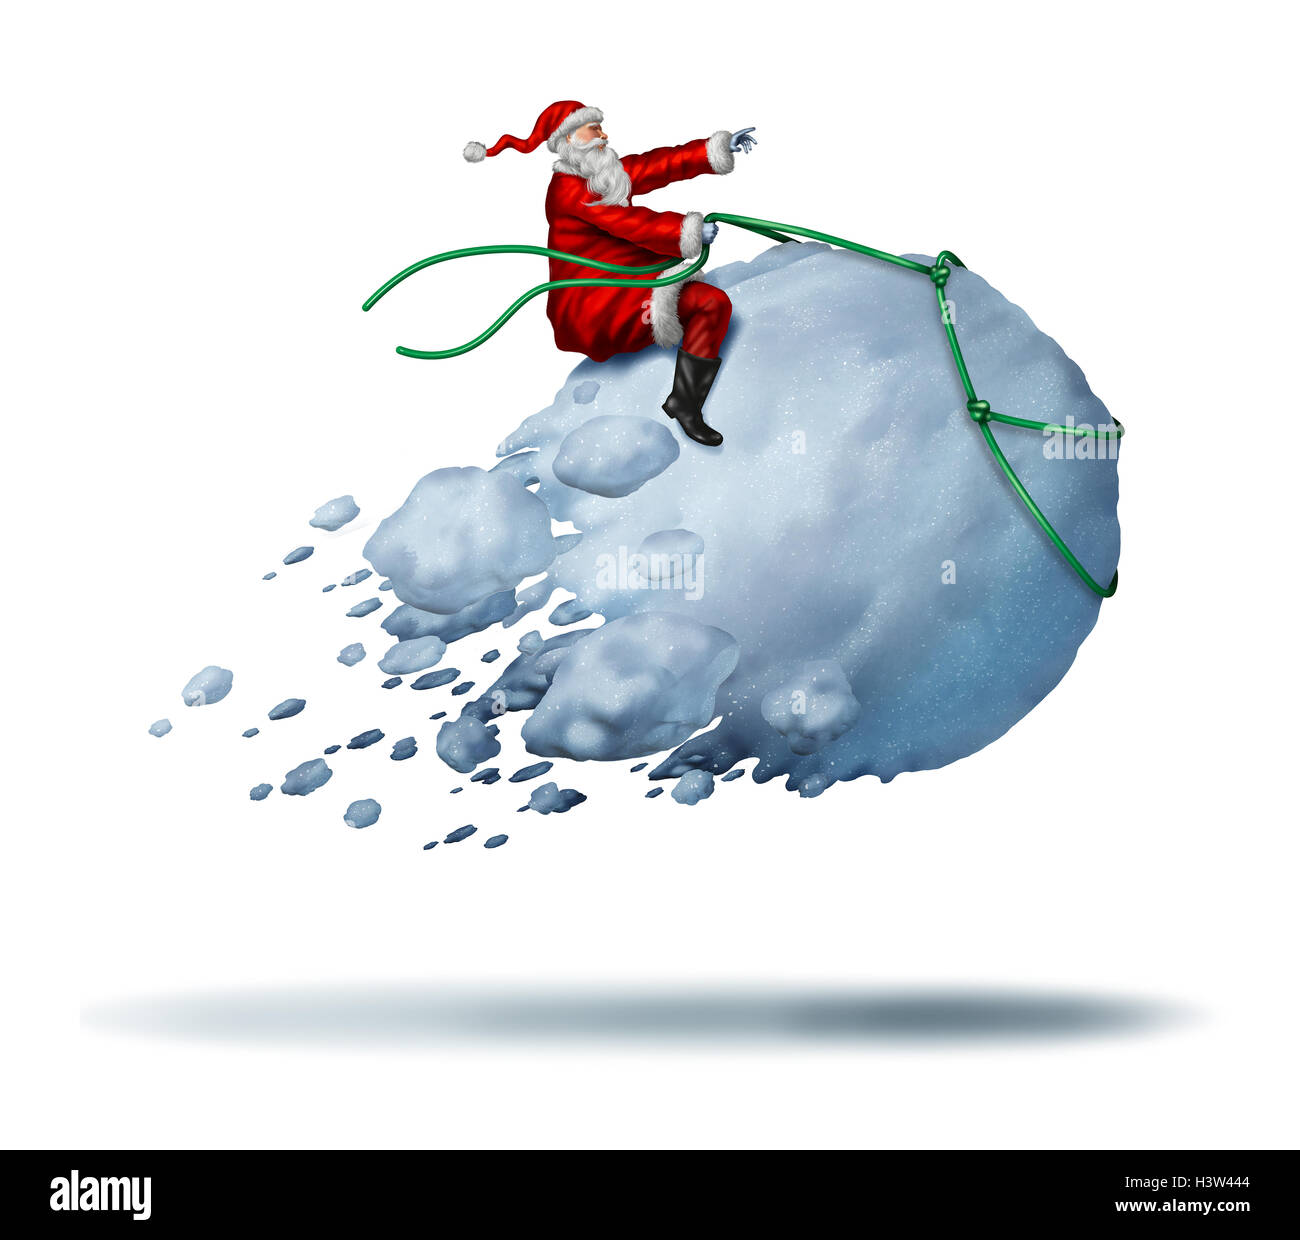 Santa Clause Snow Fun as father christmas riding a flying giant snowball as a joyful happy winter celebration activity with 3D illustration elements on a white background. Stock Photo